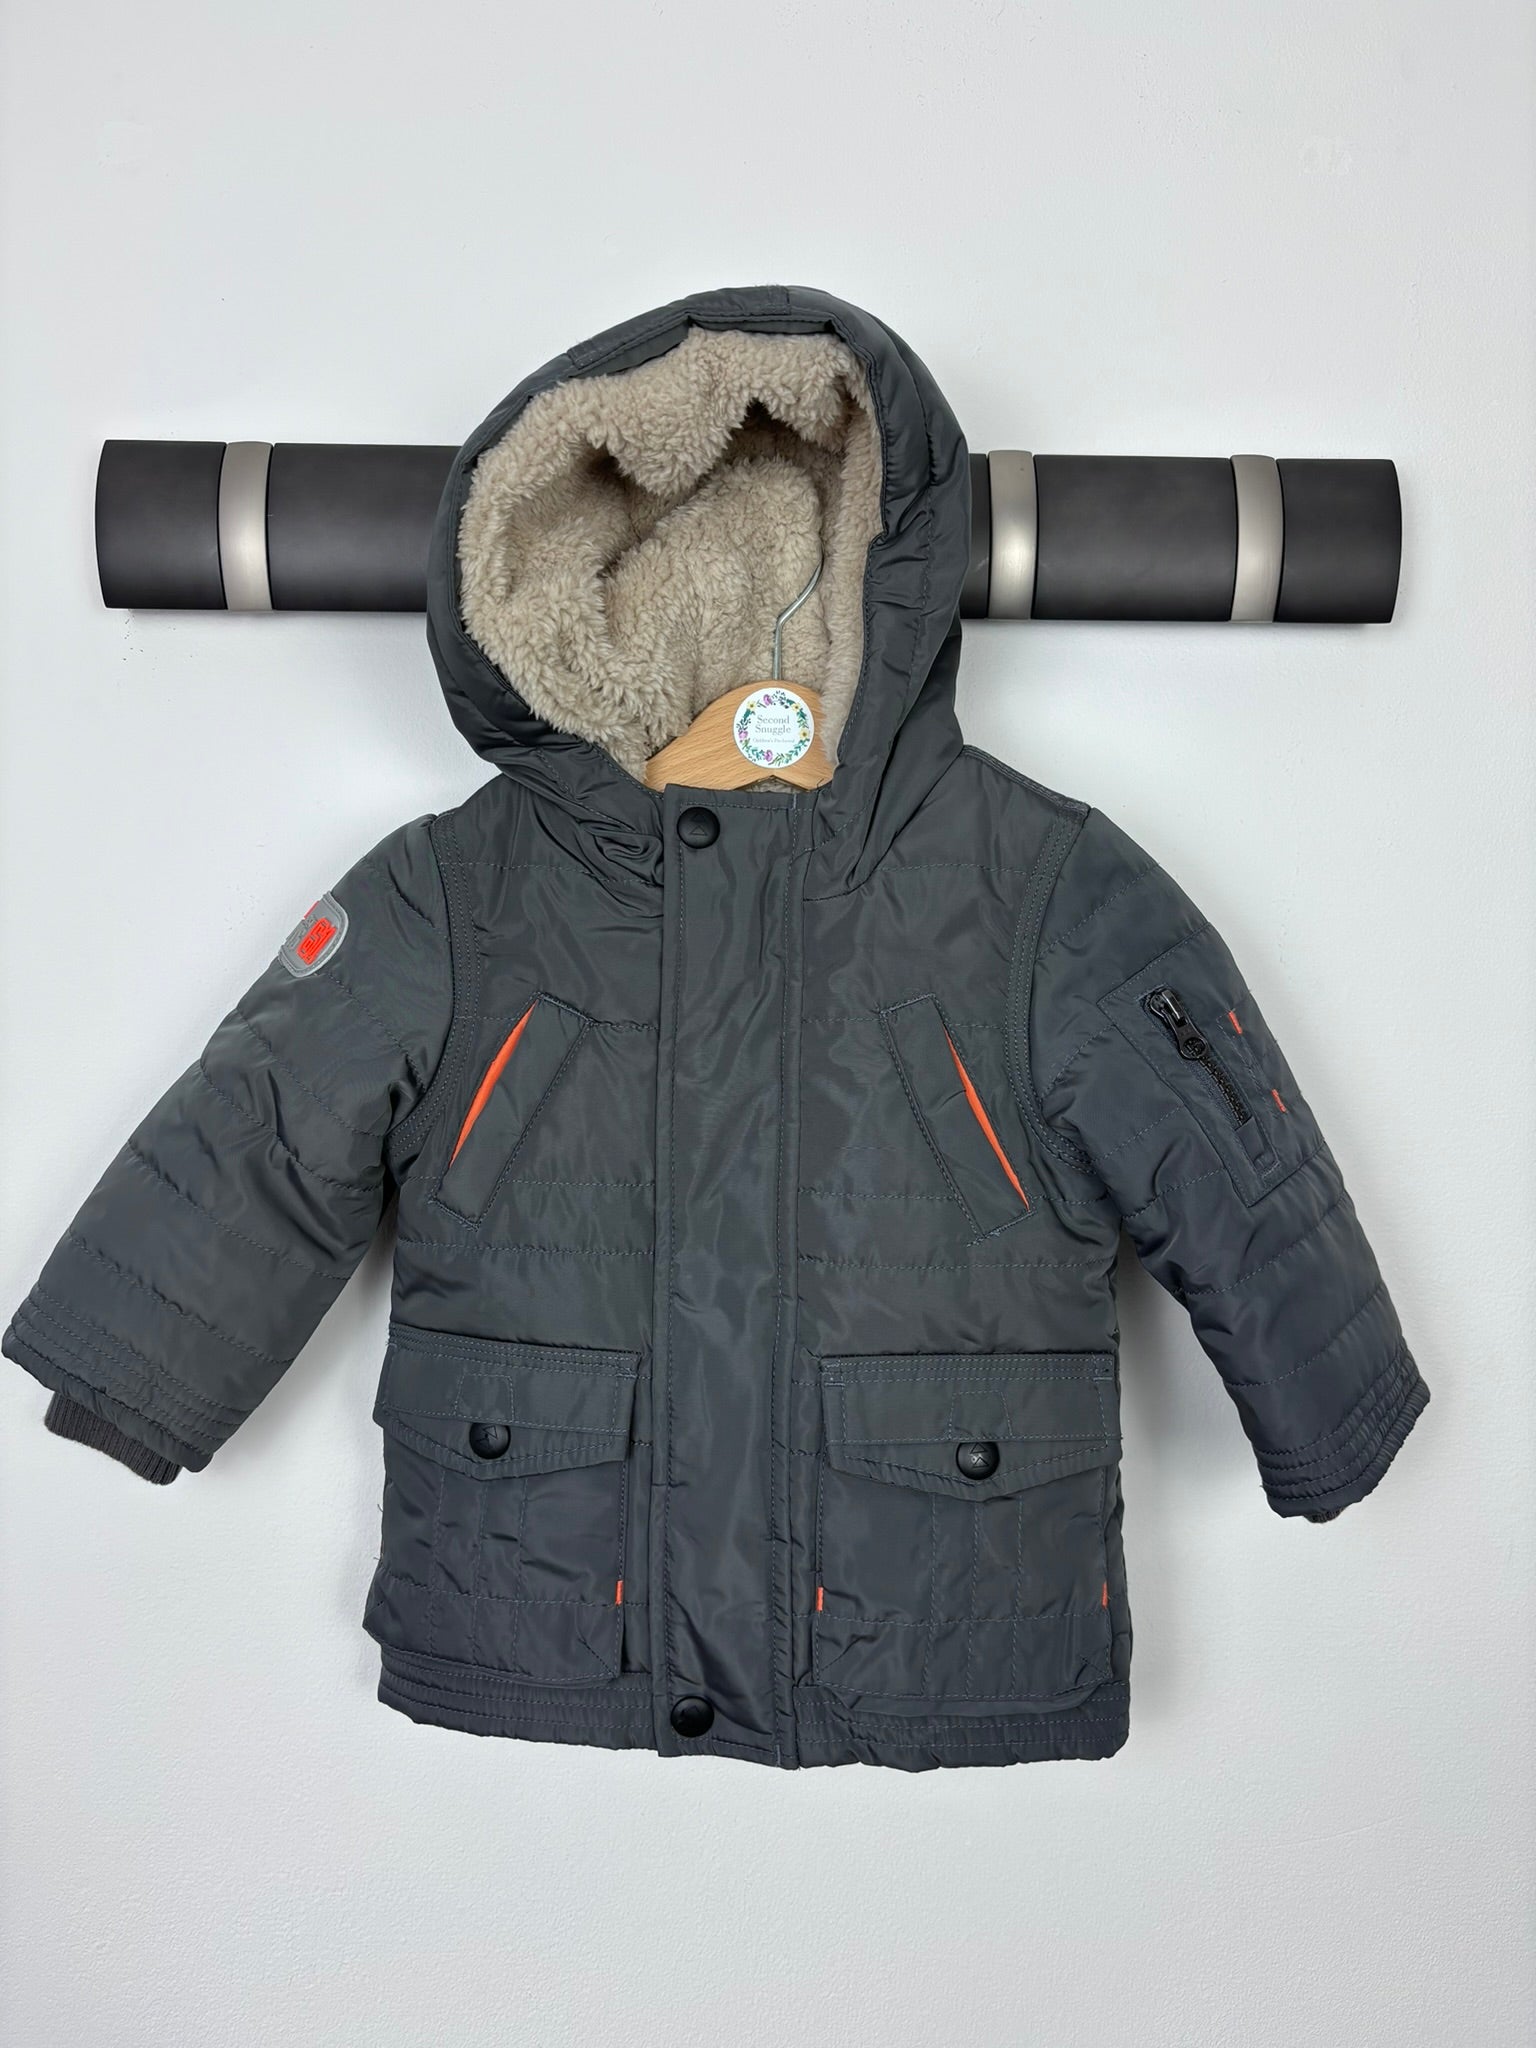 Mothercare 3-6 Months-Coats-Second Snuggle Preloved